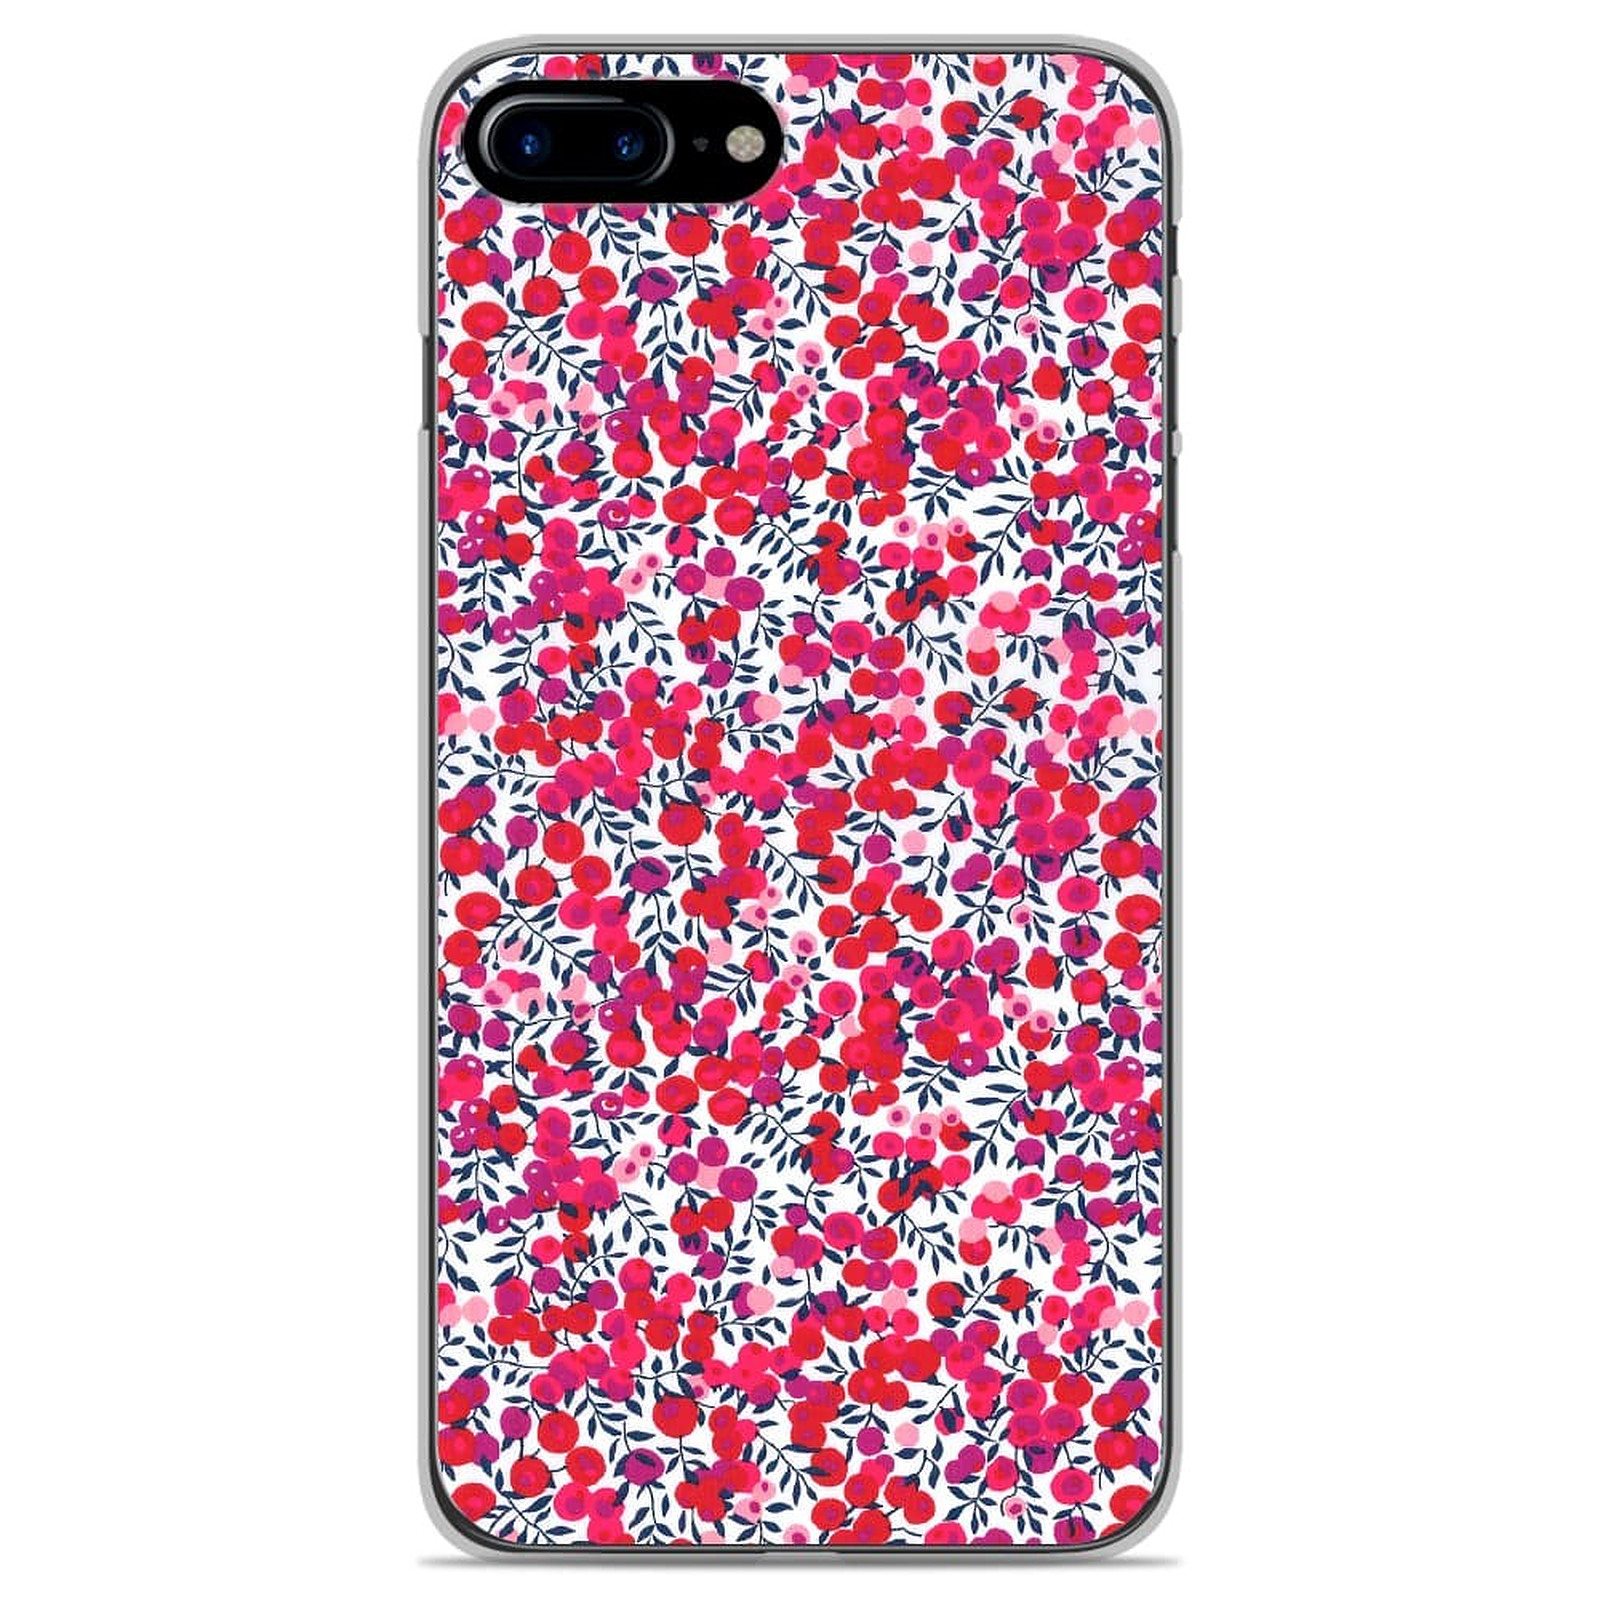 1001 Coques Coque silicone gel Apple iPhone 7 Plus motif Liberty Wiltshire Rouge - Coque telephone 1001Coques